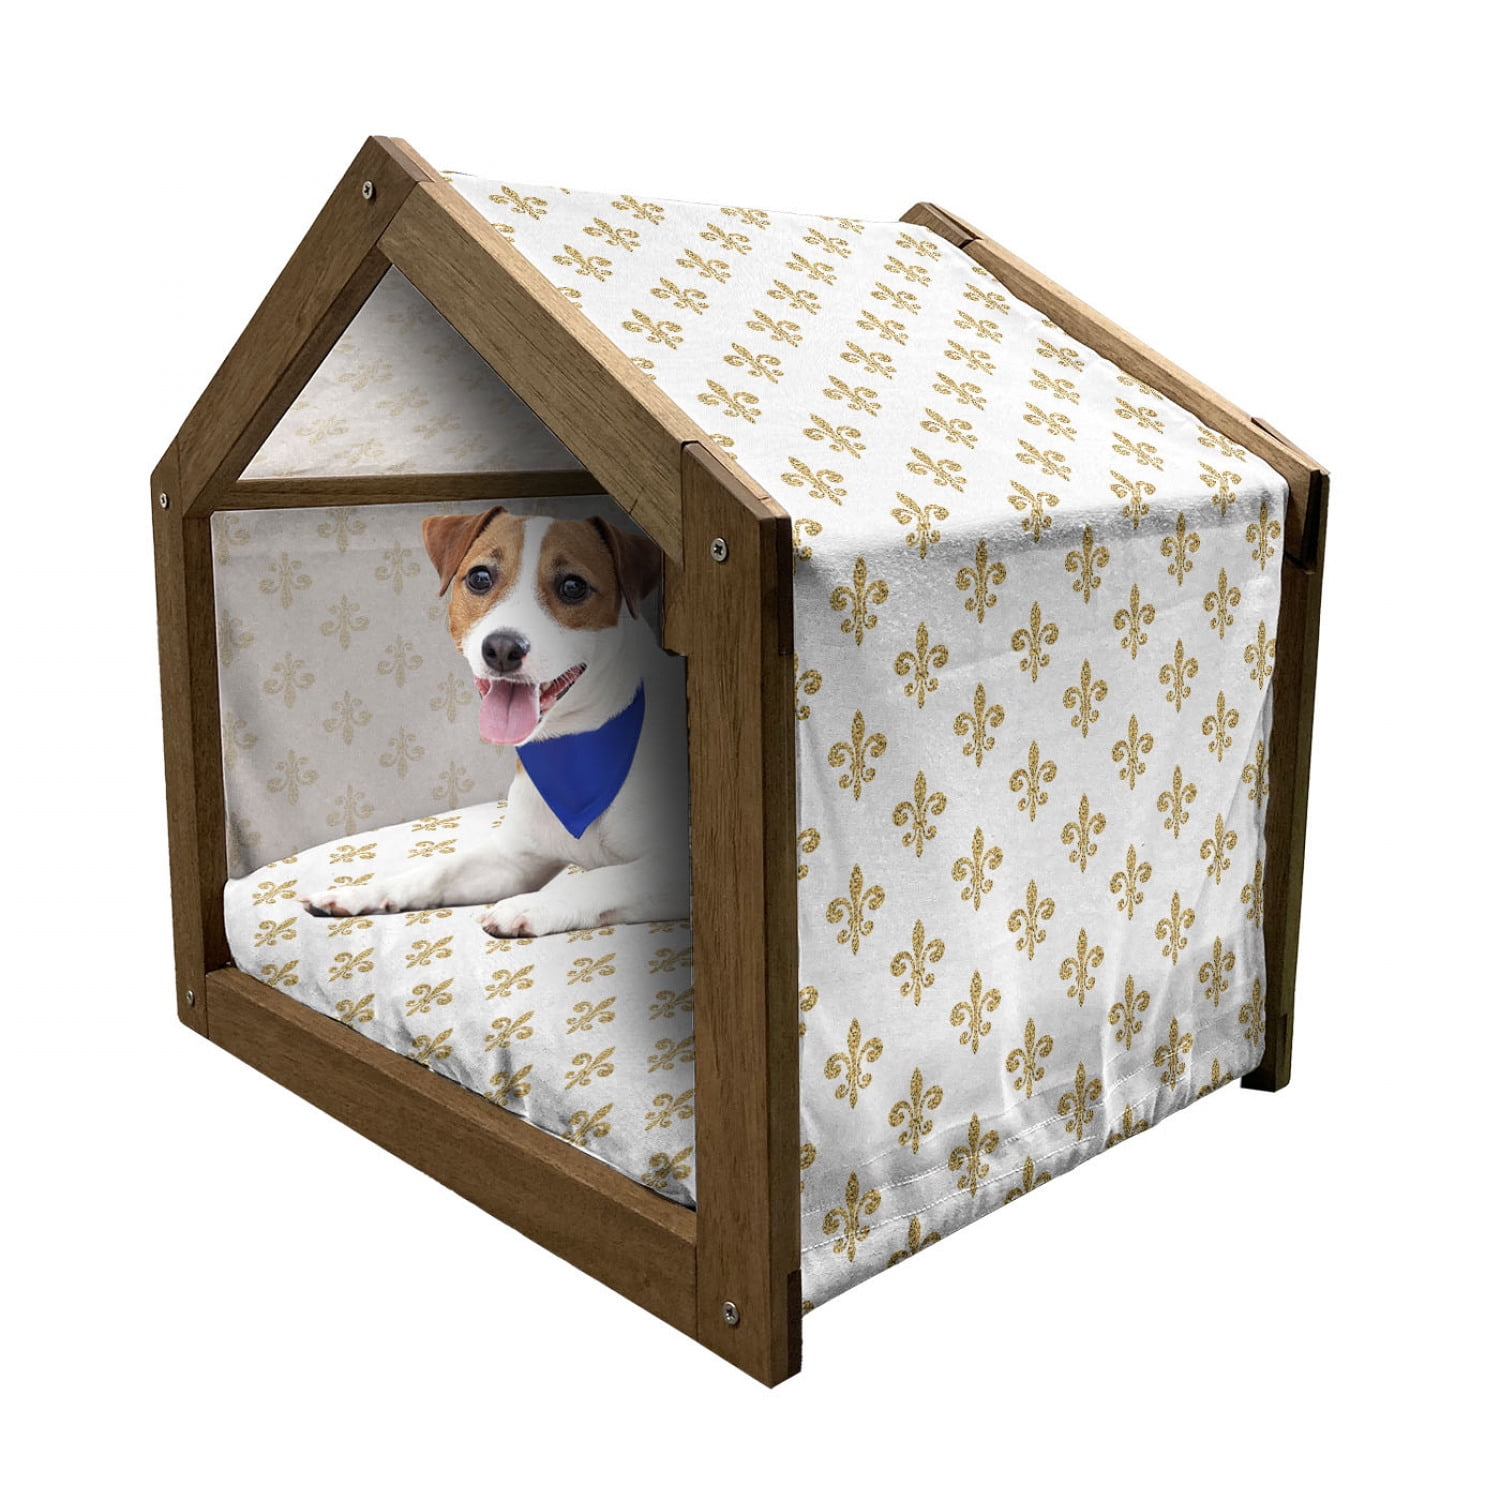 Fleur De Lis Pet European Lily Aristocratic Dignified Print, Outdoor & Indoor Portable Dog Kennel with Pillow and 5 Sizes, Yellow White, by Ambesonne - Walmart.com